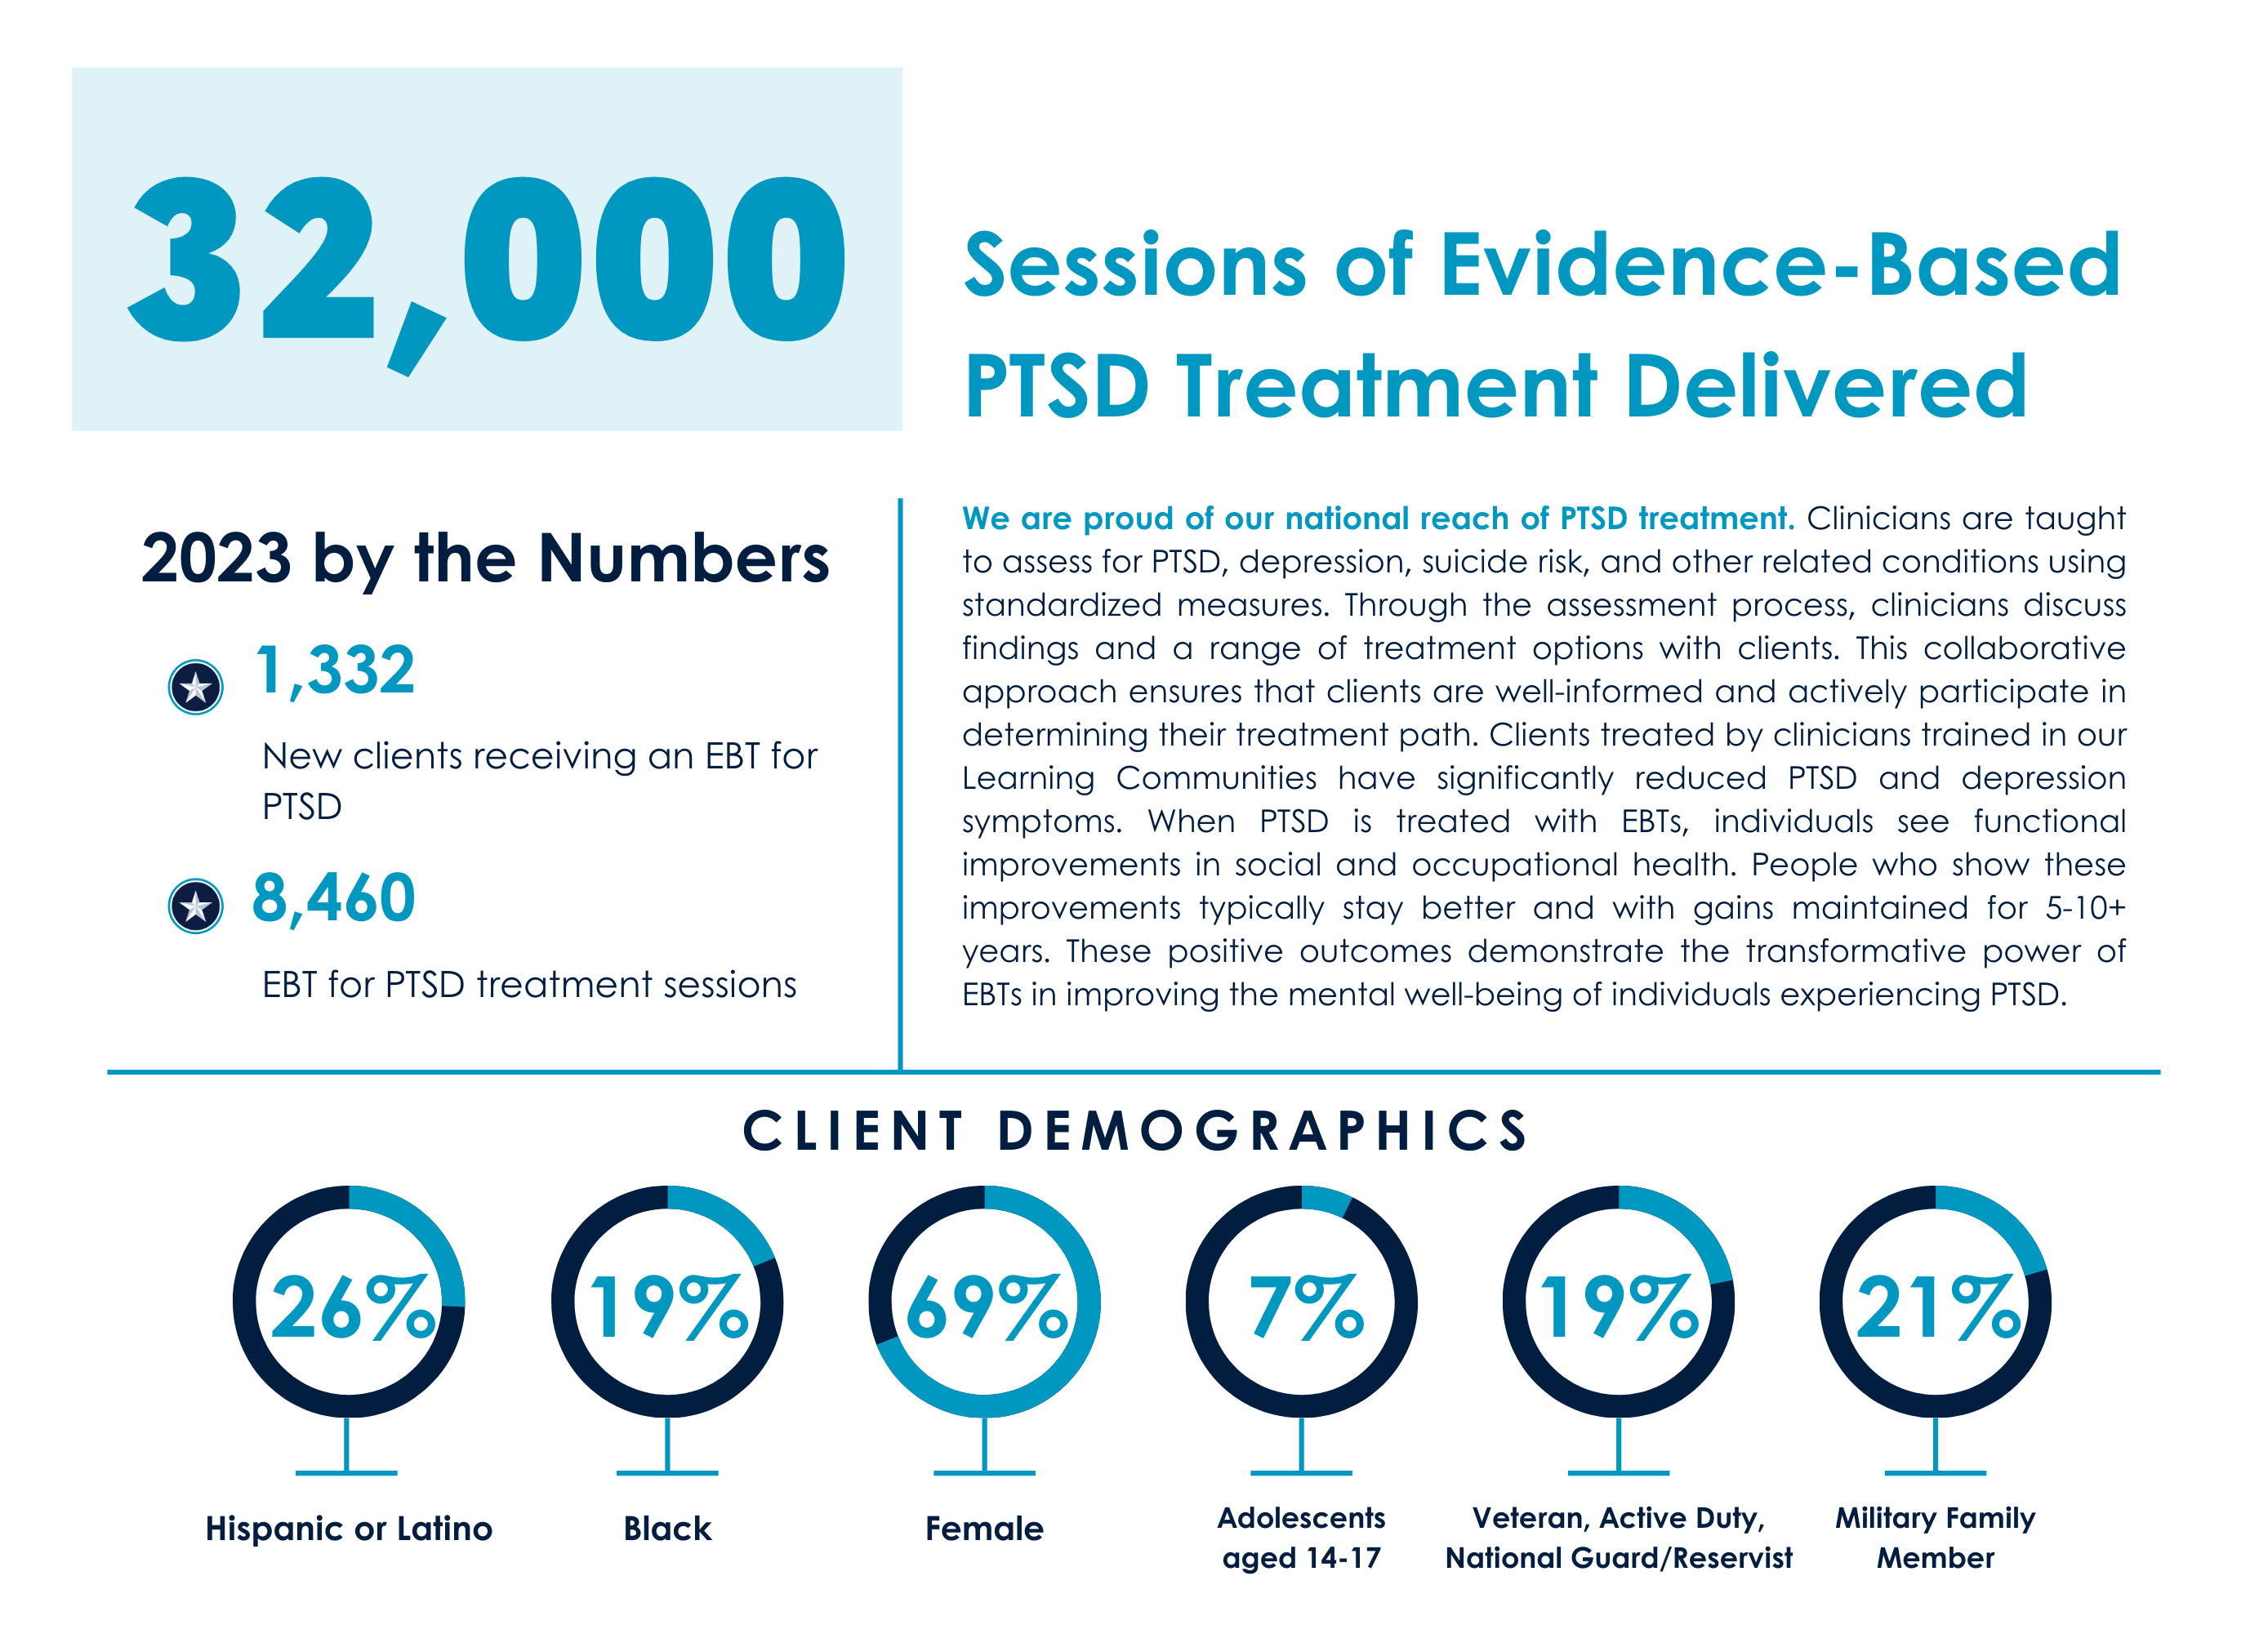 "32,000 Sessions of Evidence-Based PTSD Treatment Delivered: We are proud of our national reach of PTSD treatment. Clinicians are taught to assess for PTSD, depression, suicide risk, and other related conditions using standardized measures. Through the assessment process, clinicians discuss findings and a range of treatment options with clients. This collaborative approach ensures that clients are well-informed and actively participate in determining their treatment path. Clients treated by clinicians trained in our Learning Communities have significantly reduced PTSD and depression symptoms. When PTSD is treated with EBTs, individuals see functional improvements in social and occupational health. People who show these improvements typically stay better and with gains maintained for 5-10+ years. These positive outcomes demonstrate the transformative power of EBTs in improving the mental well-being of individuals experiencing PTSD." Text on the side reads, "2023 by the numbers: 1,332 New clients receiving an EBT for PTSD, 8,460 EBT for PTSD treatment sessions." Bottom section reads, "CLIENT DEMOGRAPHICS: 26% Hispanic/Latino, 19% Black, 69% Female, 7% Adolescents aged 14-17, 19% Veteran, Active Duty, National Guard/Reservist, 21% Military Family Member."